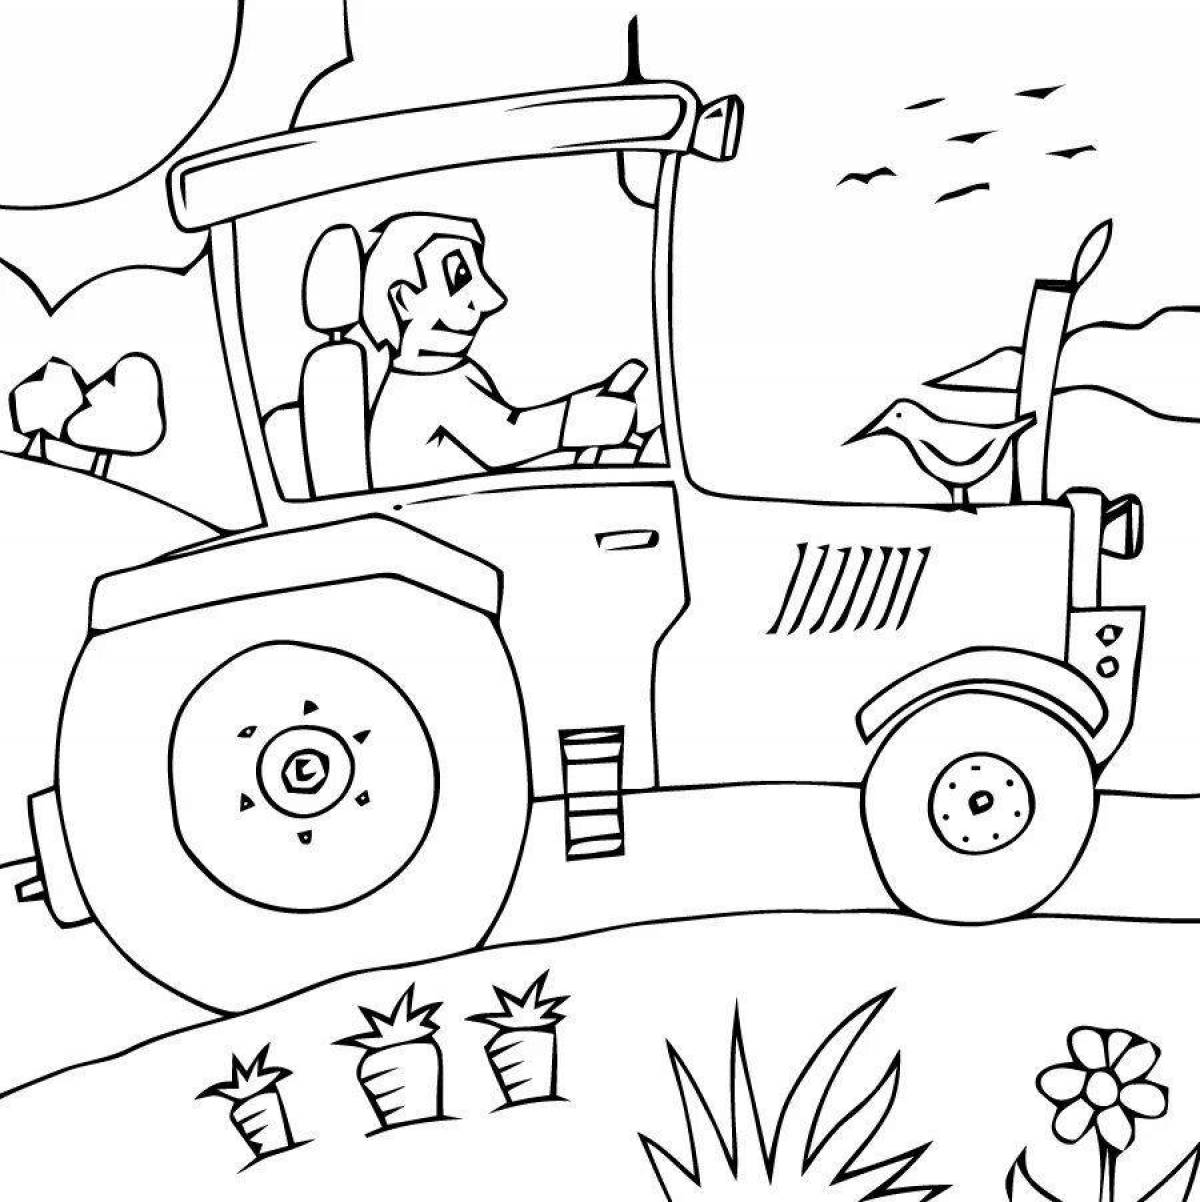 Coloring page cheerful tractor driver